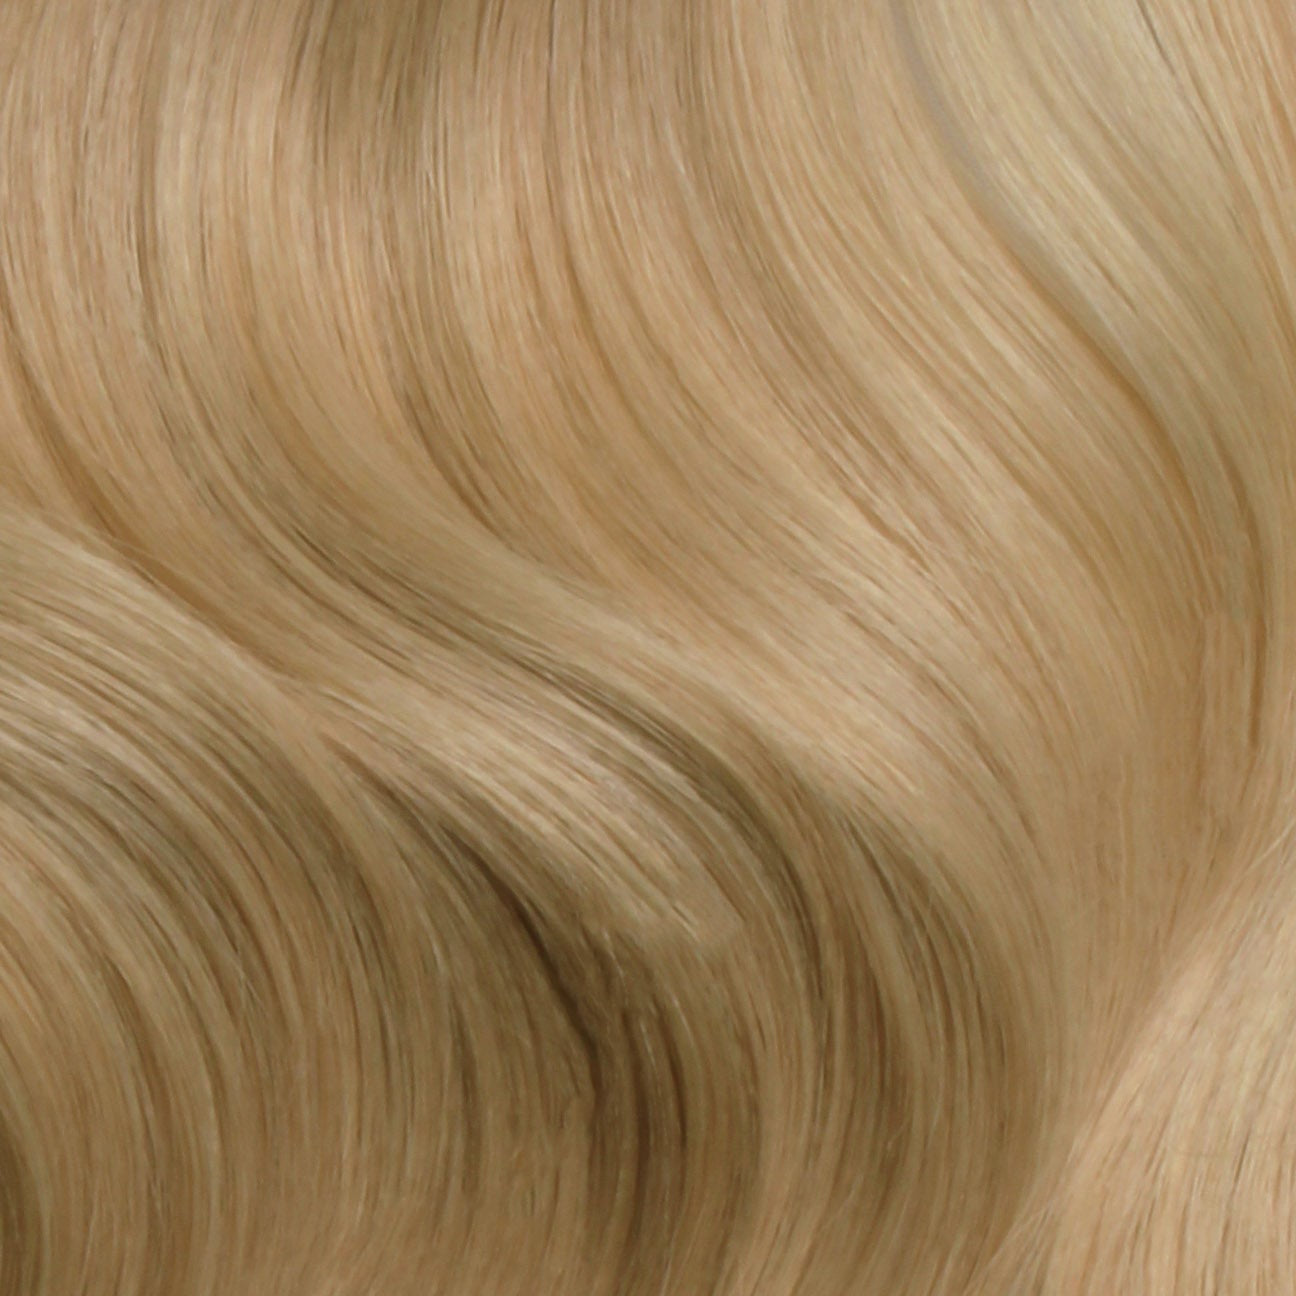 Nano Bonds 18 Inches - SWAY Hair Extensions Beach-Blonde-18-22 Ultra-fine, invisible bonds for a flawless, natural look. 100% Remy Human hair, lightweight and versatile. Reusable and perfect for individual or salon use.